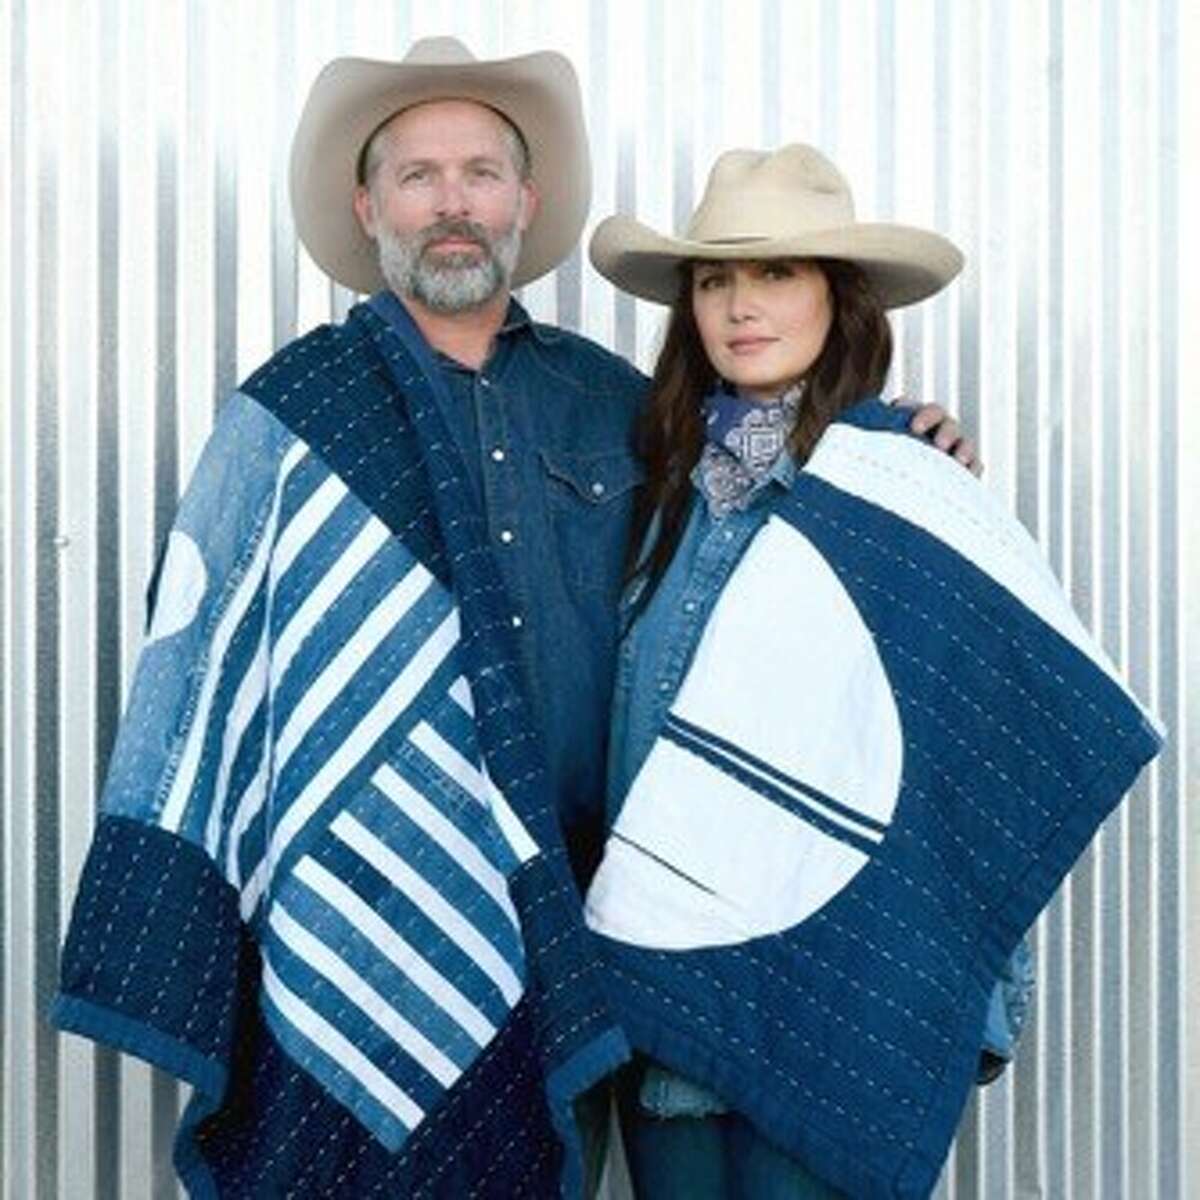 Eric and Jennie Herm are wrapped in denim blankets made from the cotton that is grown on their farm near Ackerly. The business currently is online only. The couple will be opening a shop in Marfa and have plans for shops in Houston and Santa Fe, N.M.